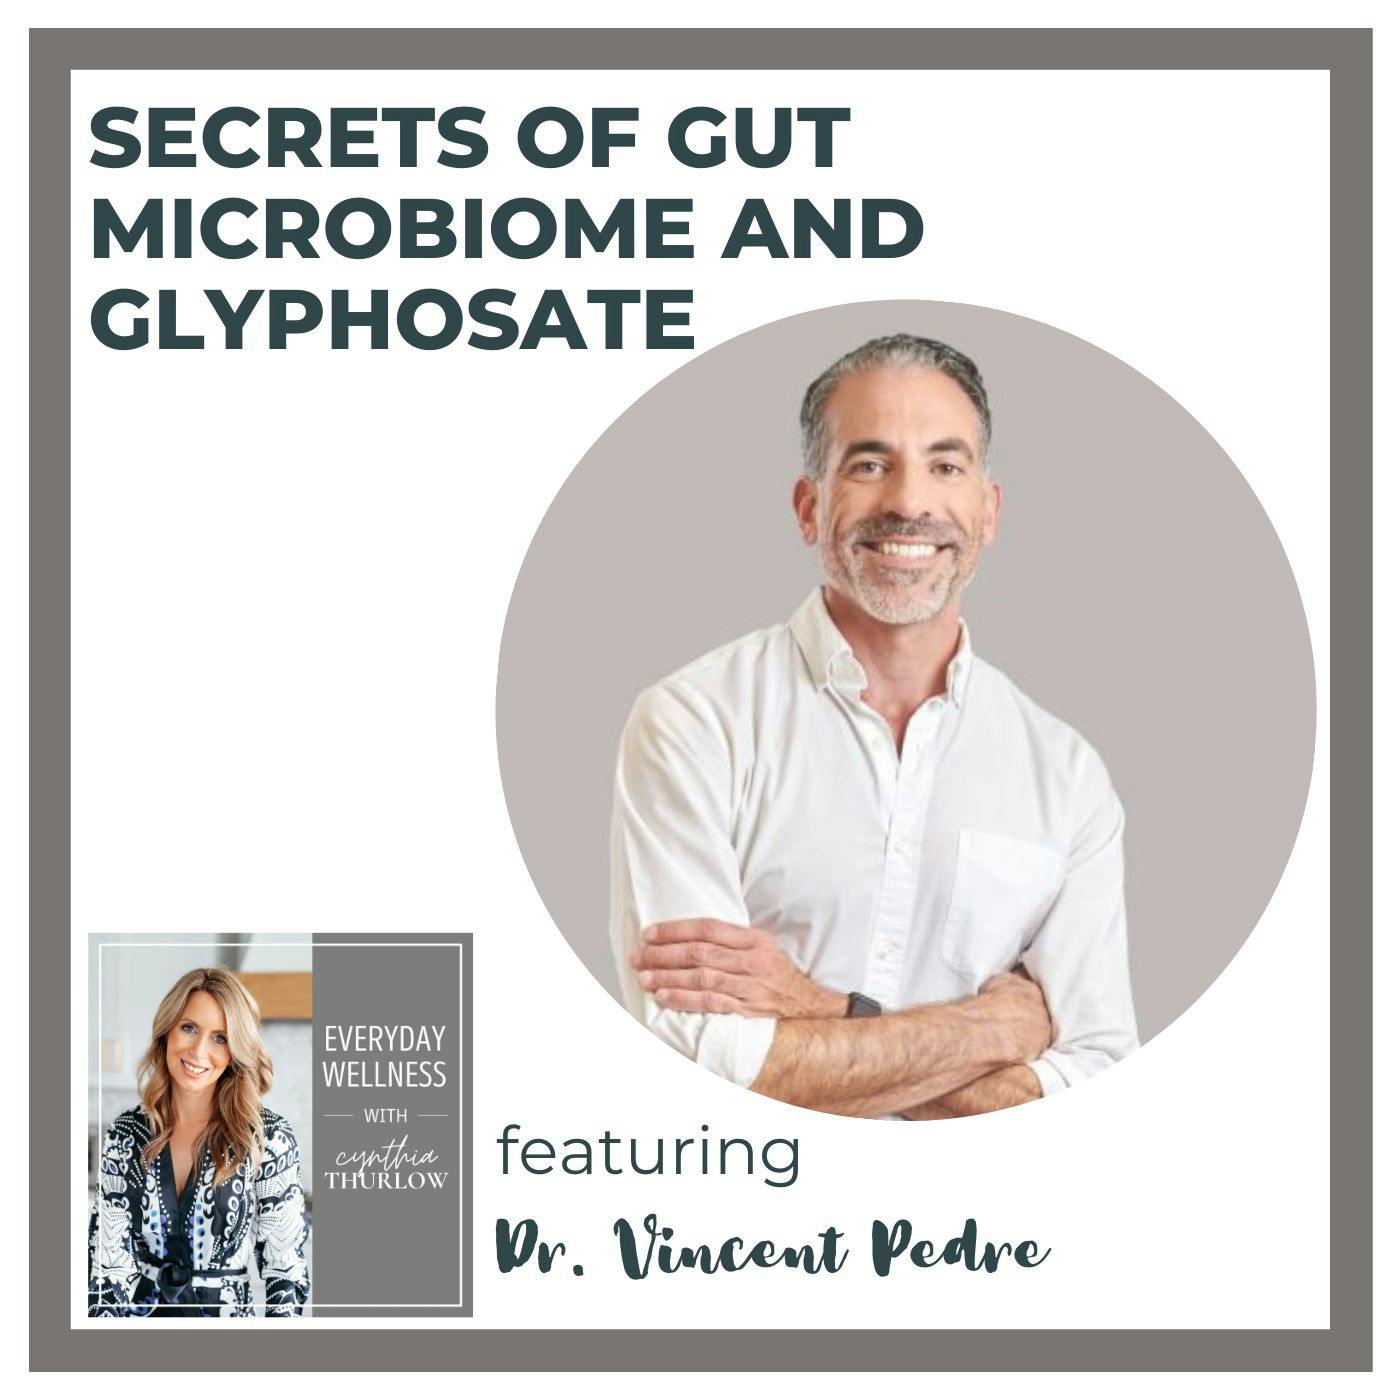 Ep. 296 Secrets of Gut Microbiome and Glyphosate with Dr. Vincent Pedre